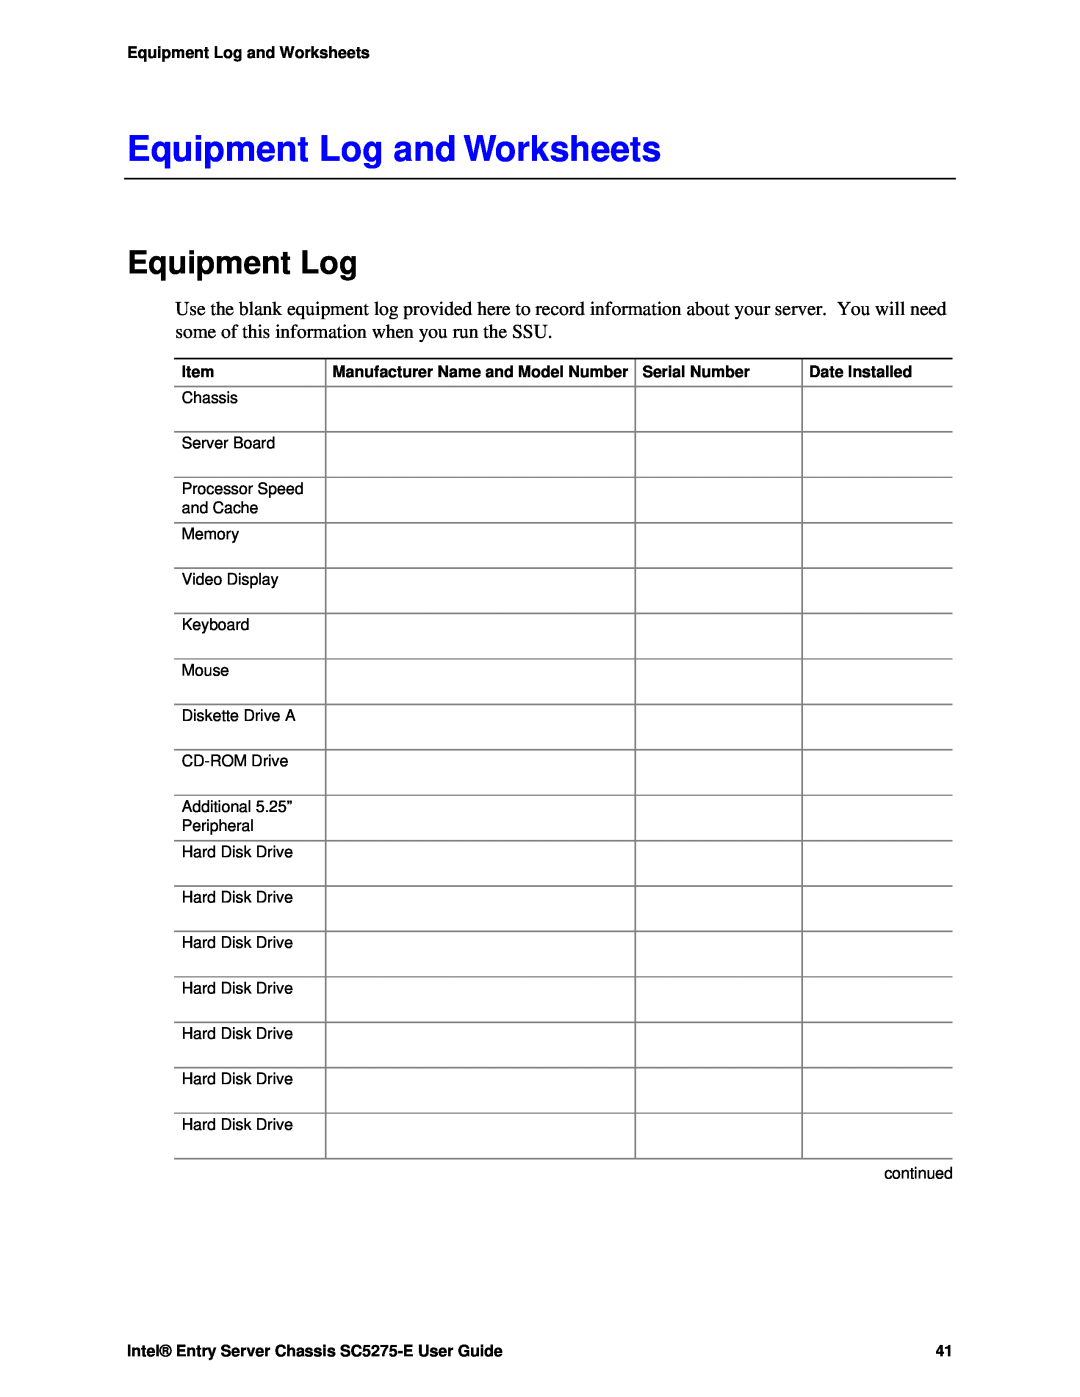 Intel C50277-001, SC5275-E Equipment Log and Worksheets, Manufacturer Name and Model Number, Serial Number, Date Installed 